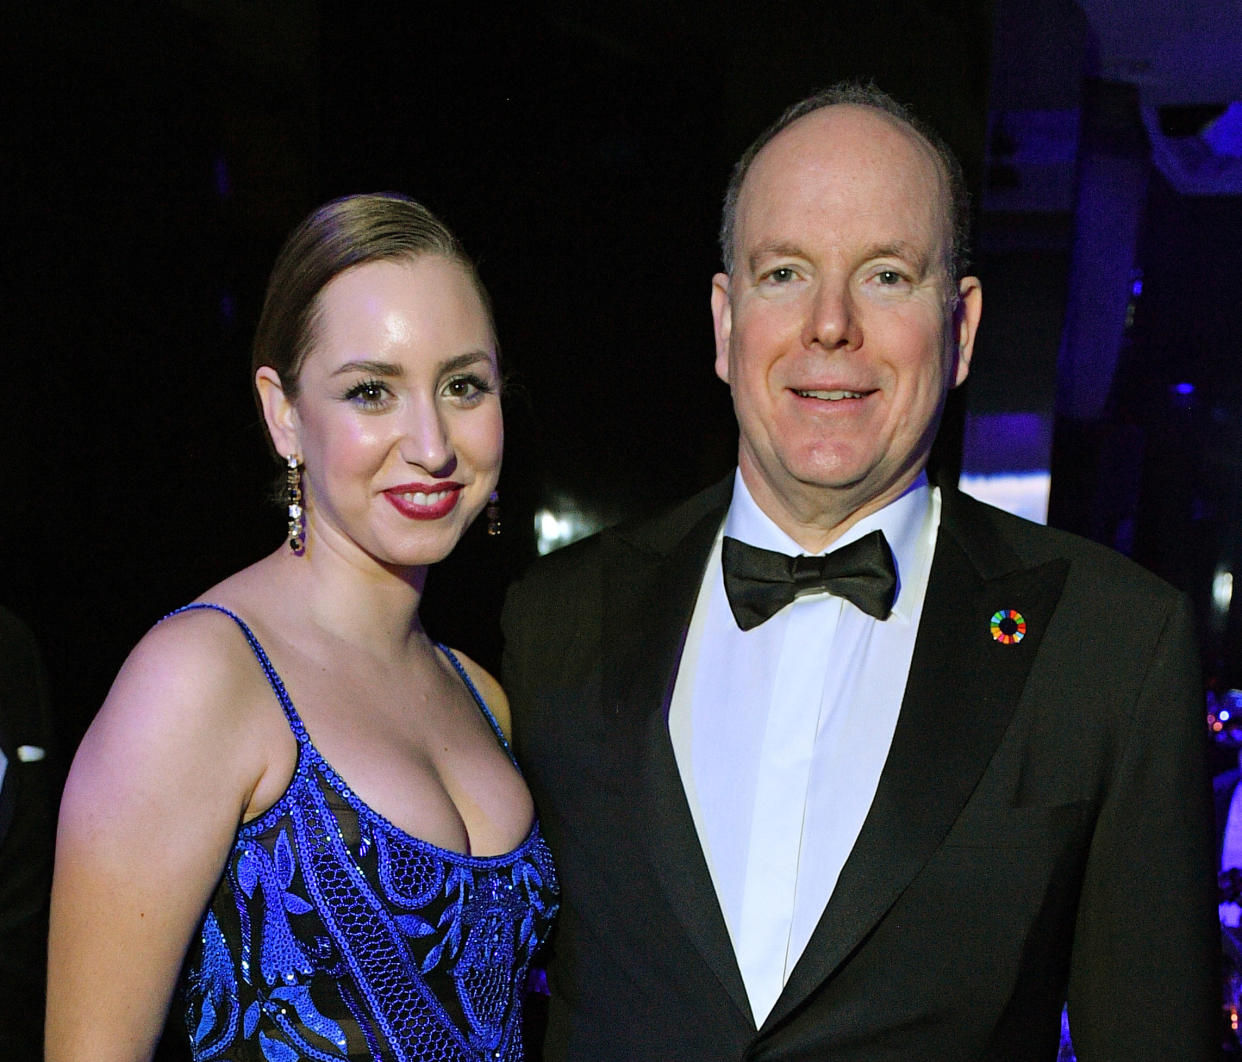 Jazmin Grace Grimaldi and her father Prince Albert pose together in formalwear. (George Pimentel / WireImage)